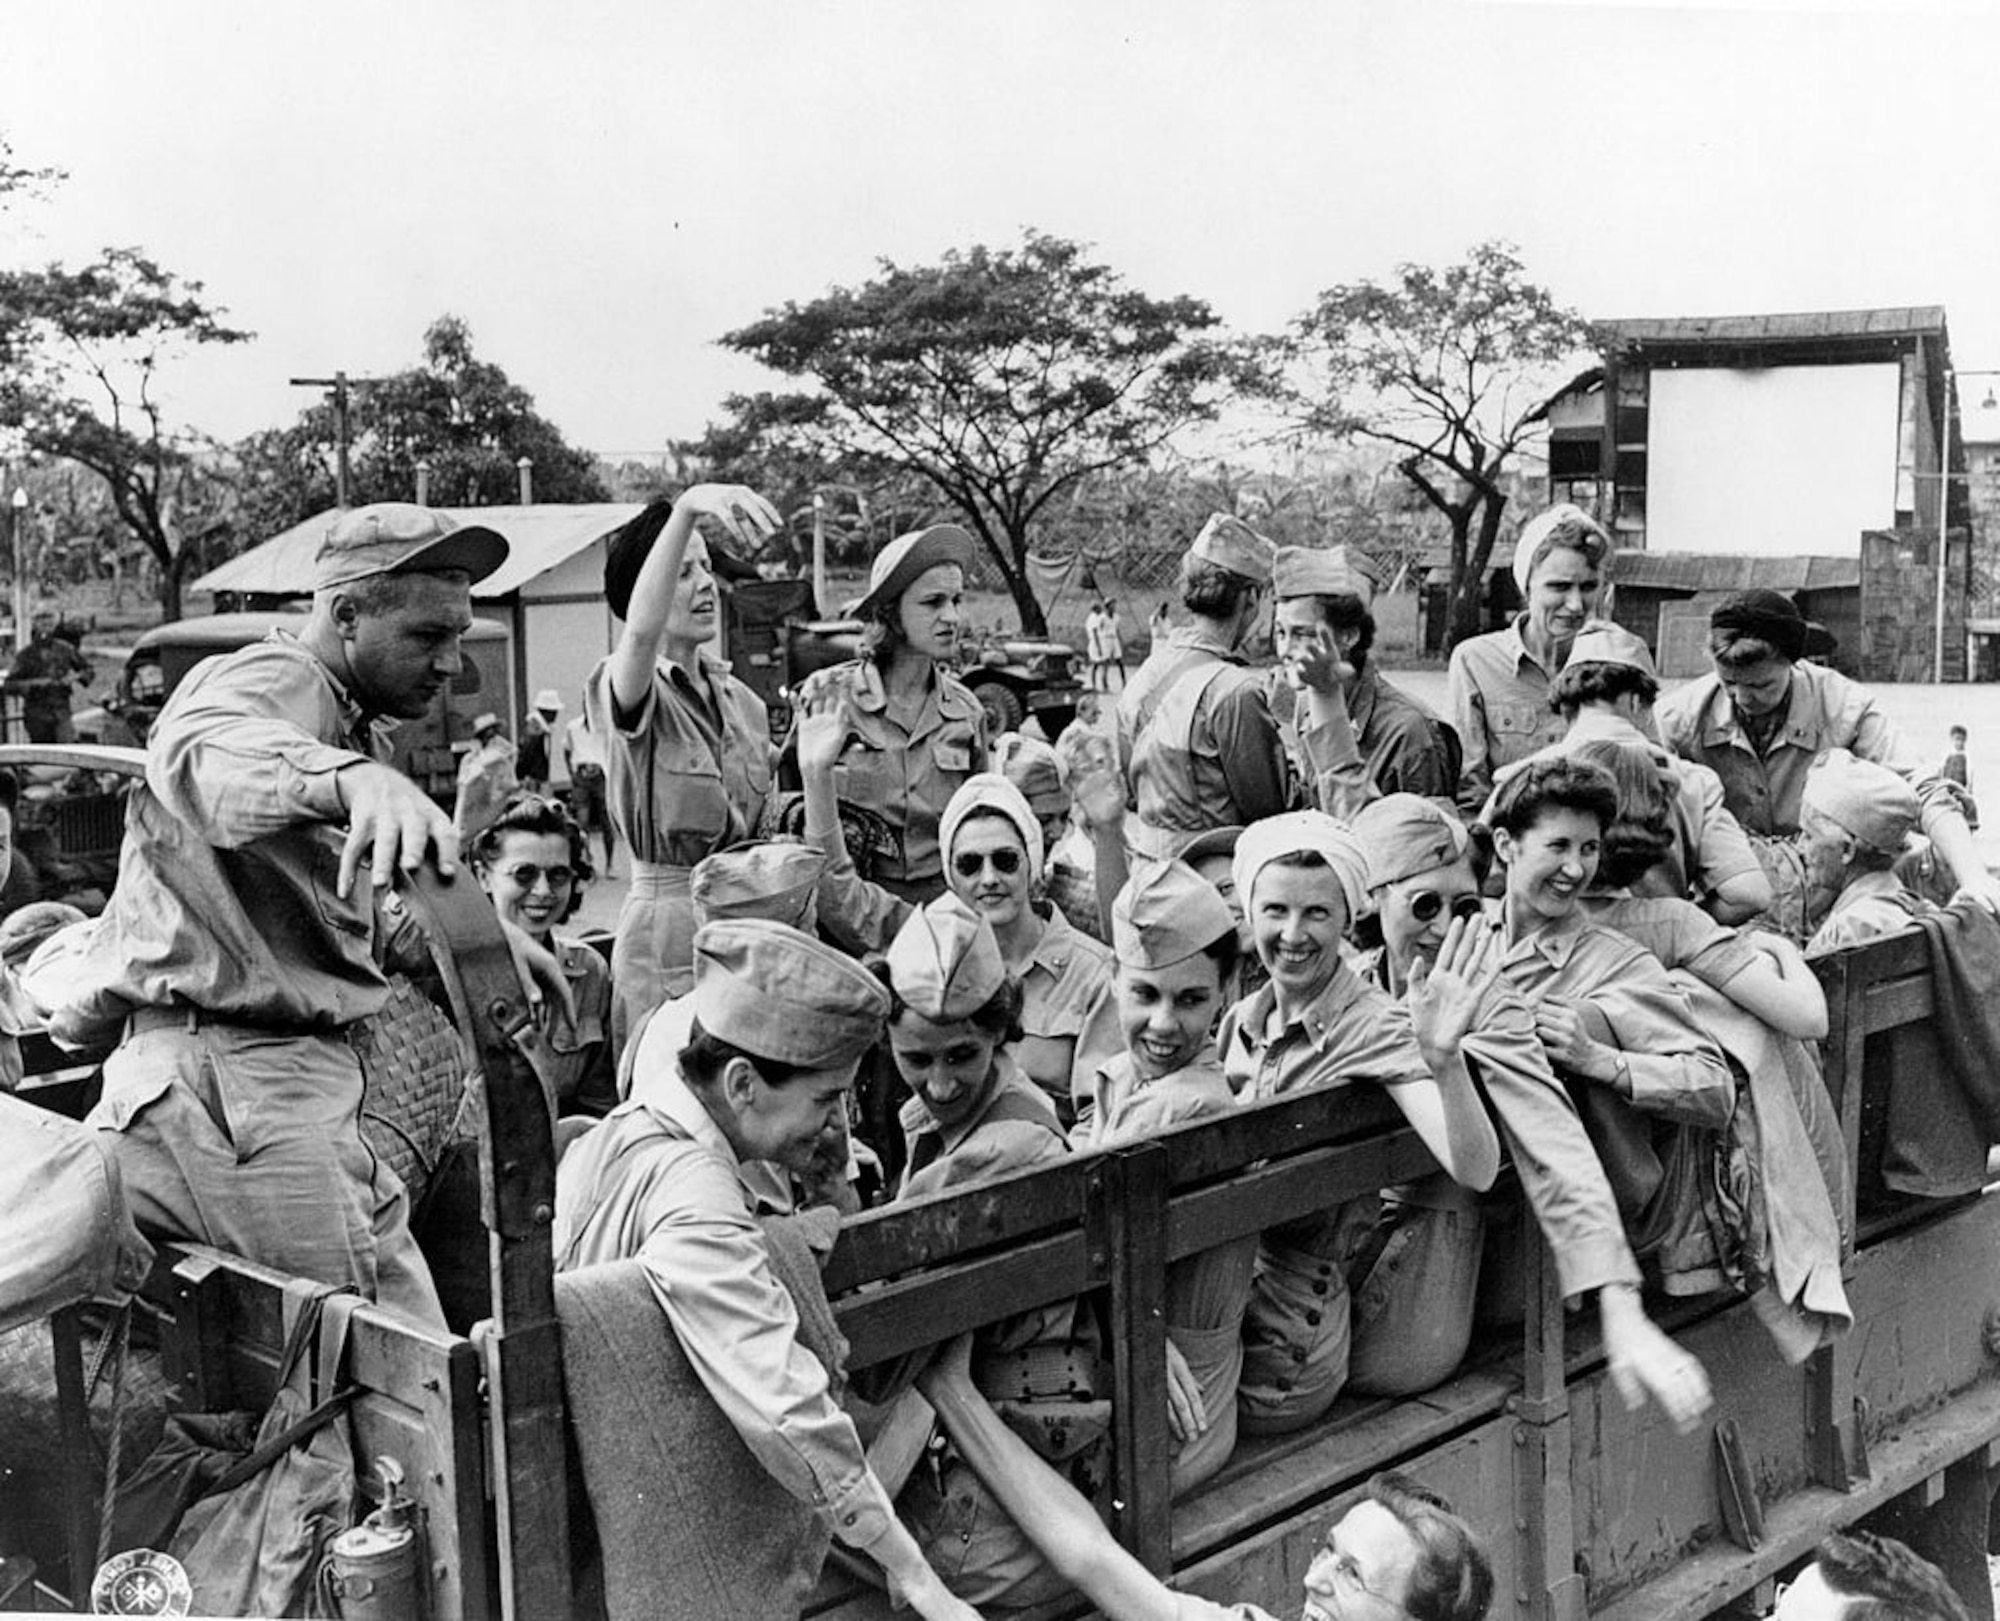 Lt. Col. Helen Hennessey was captured as a prisoner of war in 1942 and sent to the Santo Tomas internment camp in Manila. She was one of the many nurses captured on the island of Corregidor. This is an image of many of those nurses being rescued when Santo Tomas was eventually liberated by American troops in 1945. [12 February 1945]